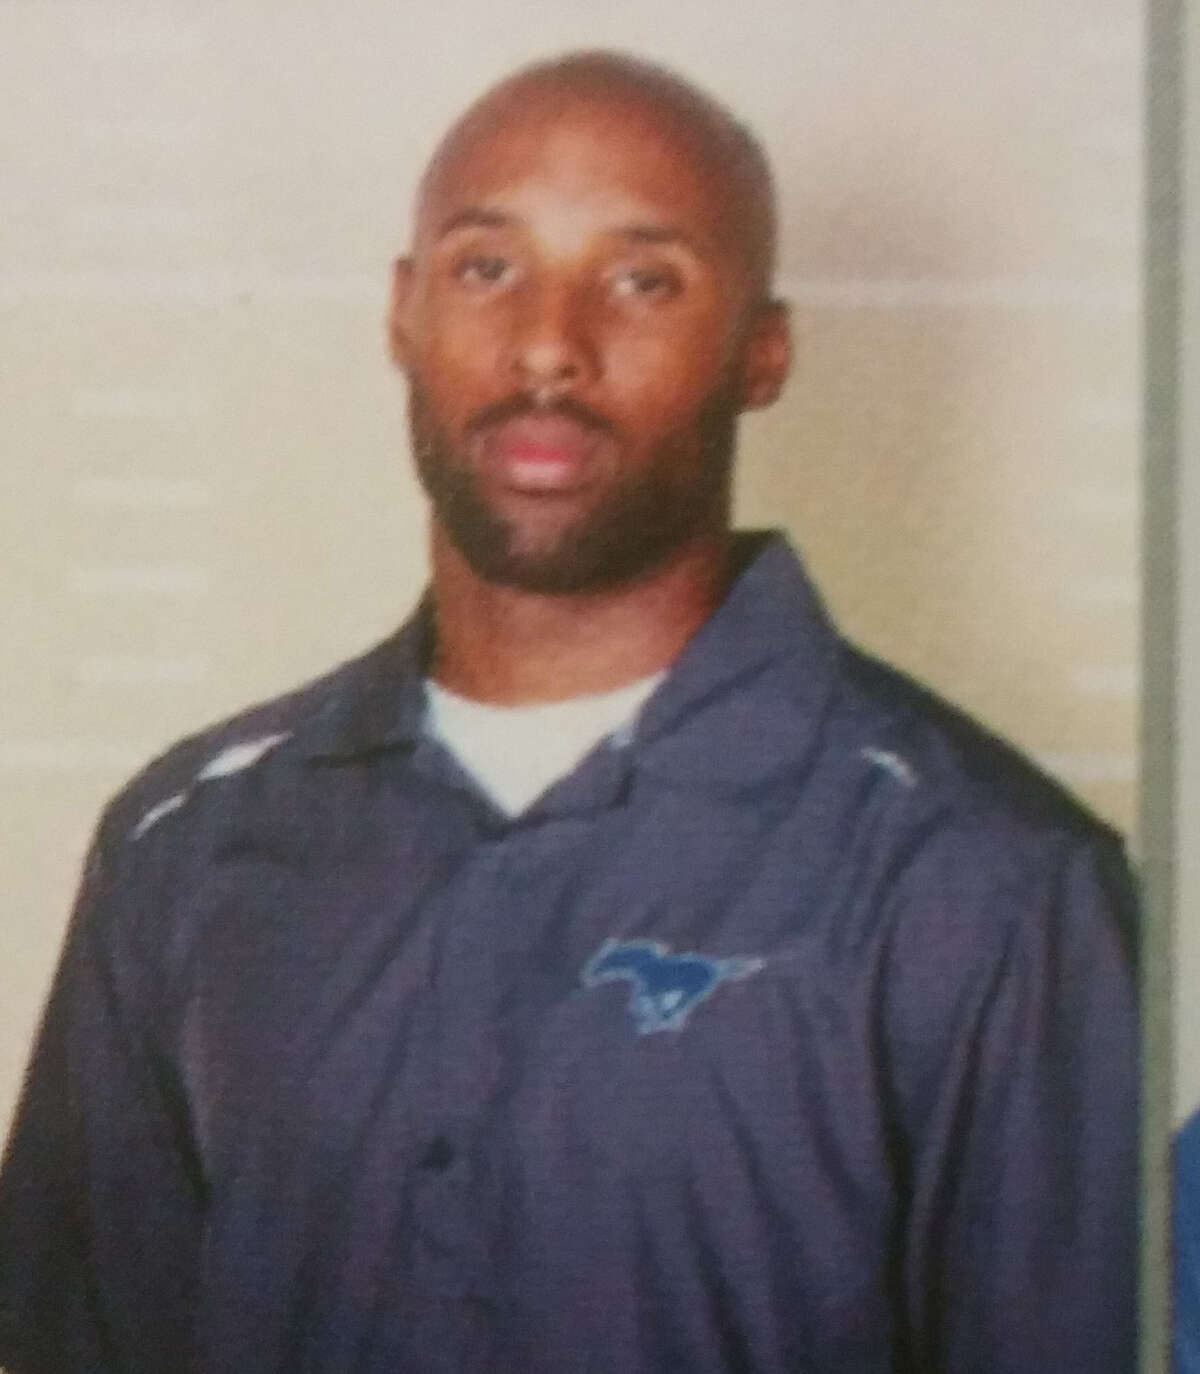 2. Did assistant Mack Breed tell players to go after Watts ? Jay players also allege assistant coach Mack Breed said “that guy (Watts) needs to pay for cheating us,” according to Northside ISD officials. Breed, the defensive backs coach, was placed on paid administrative leave on Tuesday. The 29-year-old former Jay standout was hired as an assistant in 2011. Prior to that, Breed spent one year at Brandeis, another Northside ISD school. Photo: Jay assistant Mack Breed has been placed on paid administrative leave, Northside ISD spokesman Pascual Gonzalez said at a press conference Tuesday. “This guy needs to pay for cheating us,” Breed allegedly said.